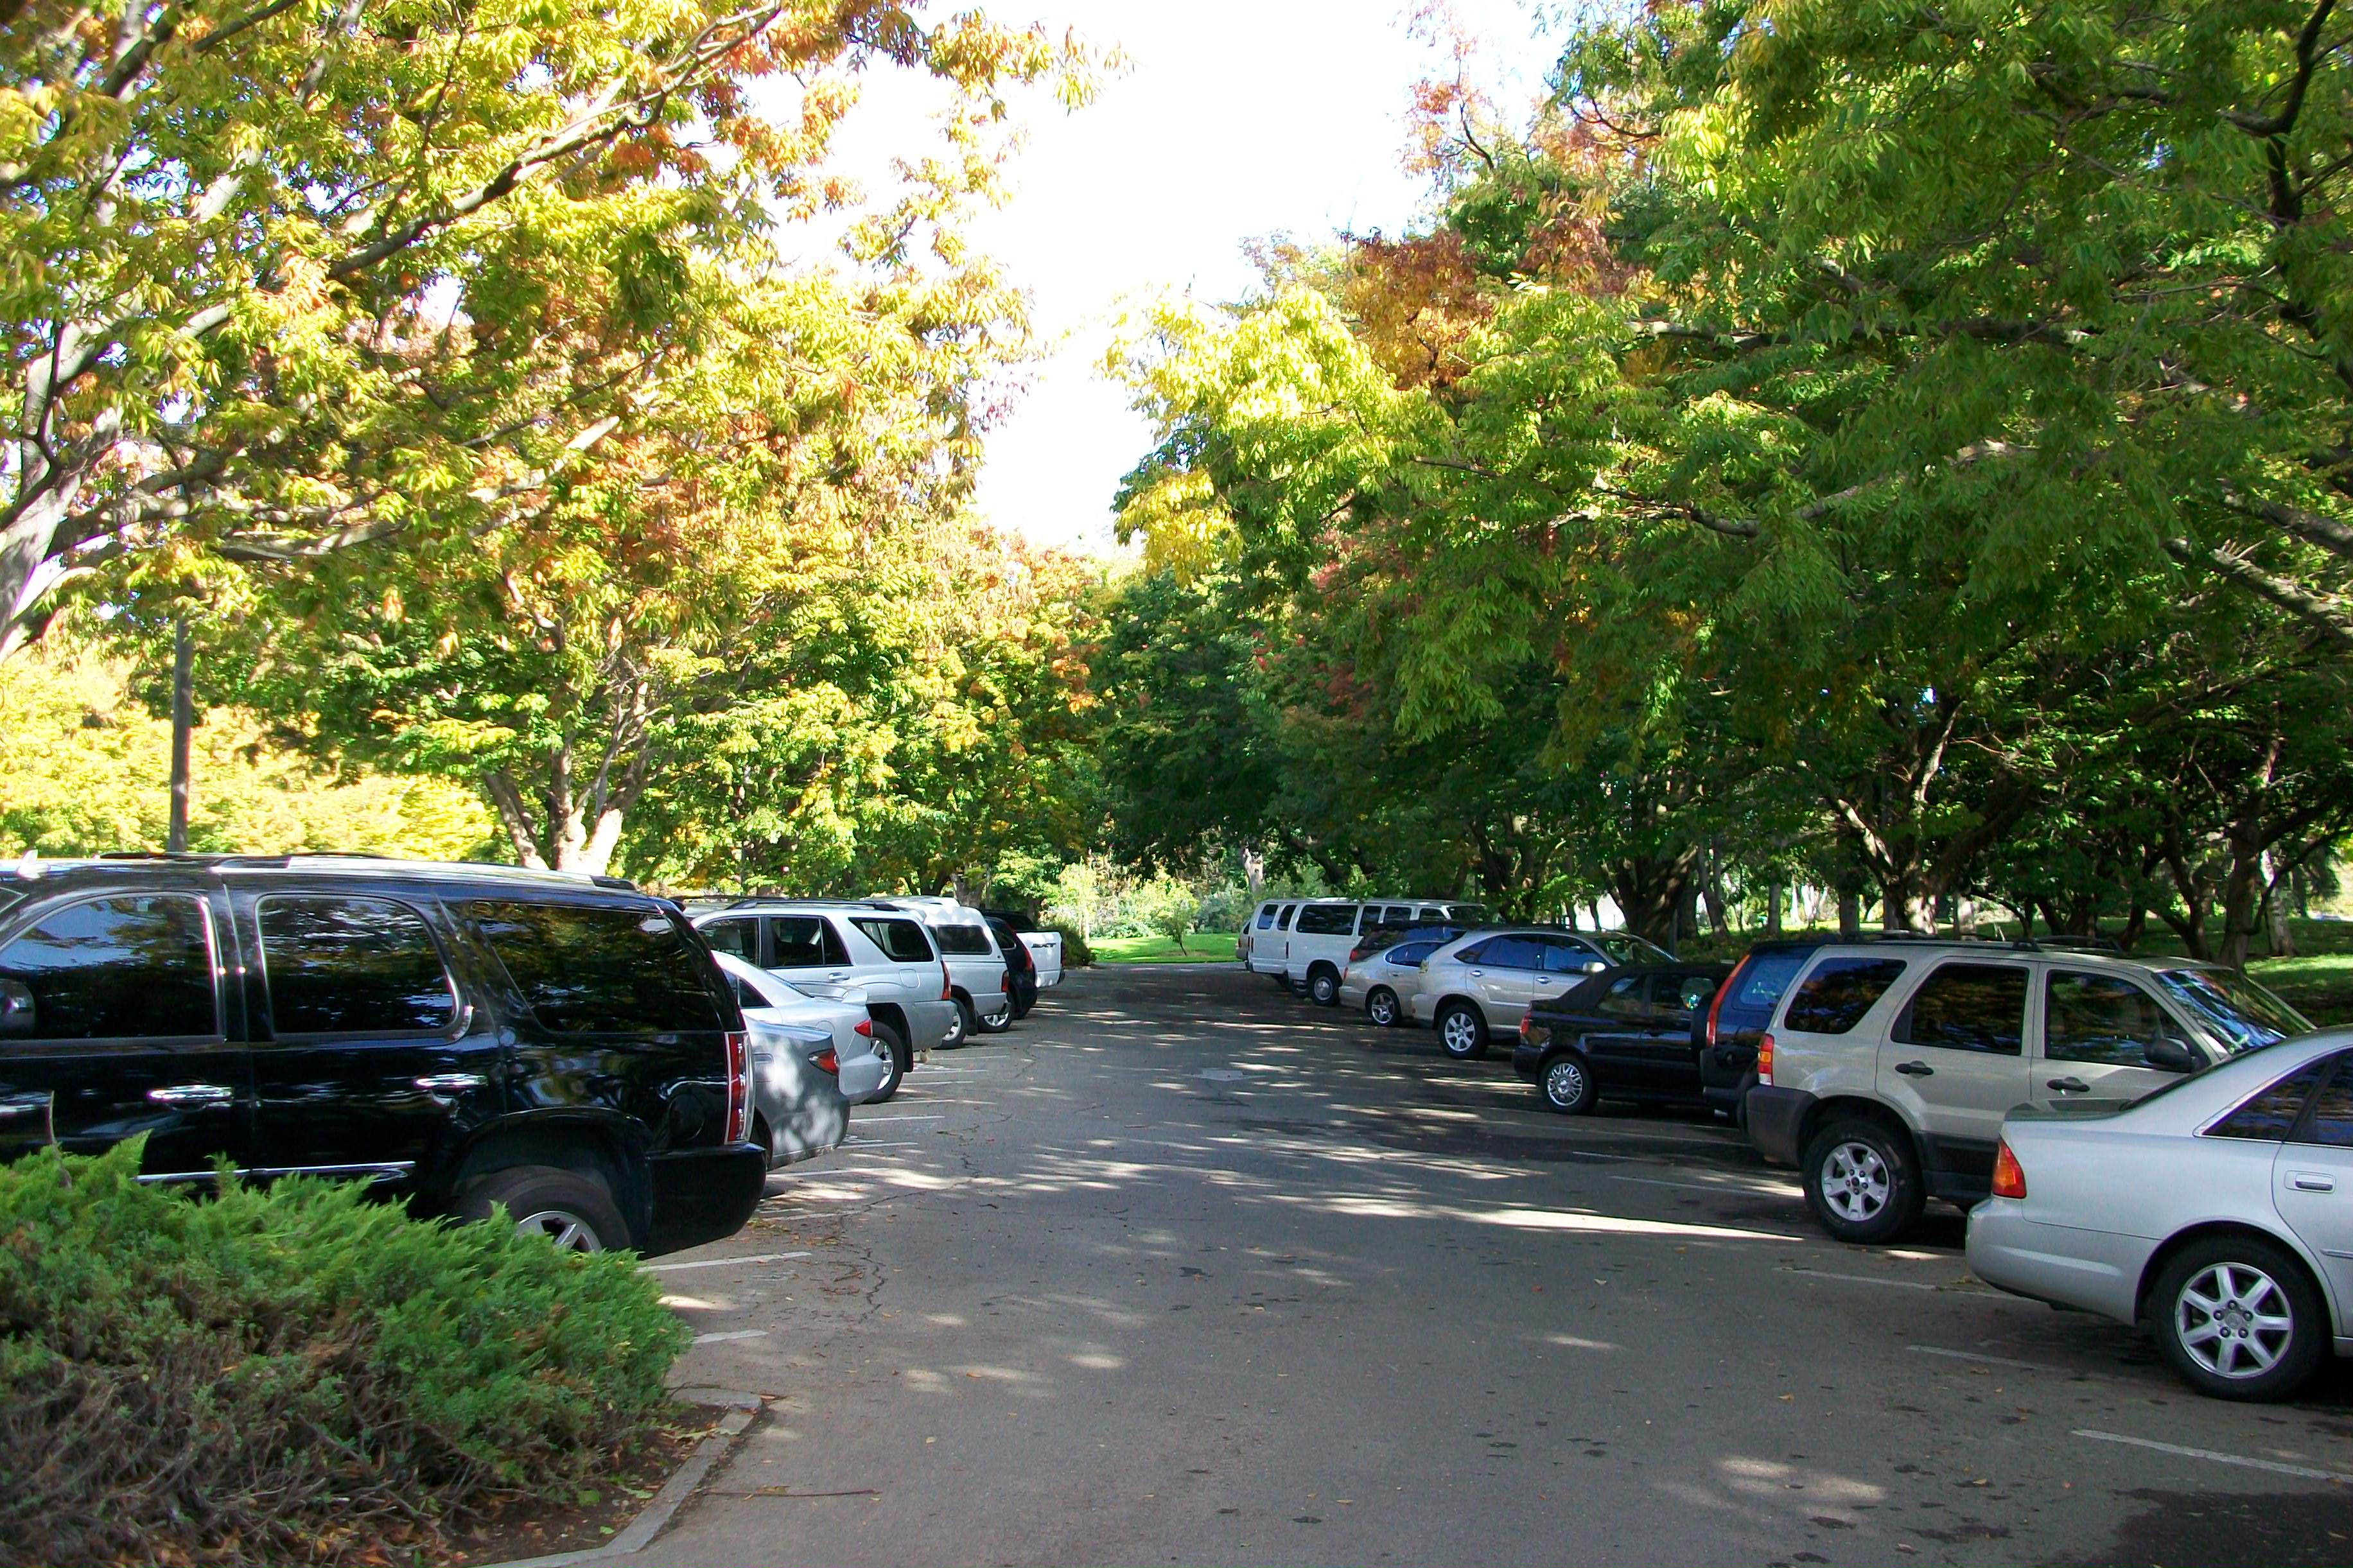 local ecologist: Cooling parking lots - trees face competition from PV ...